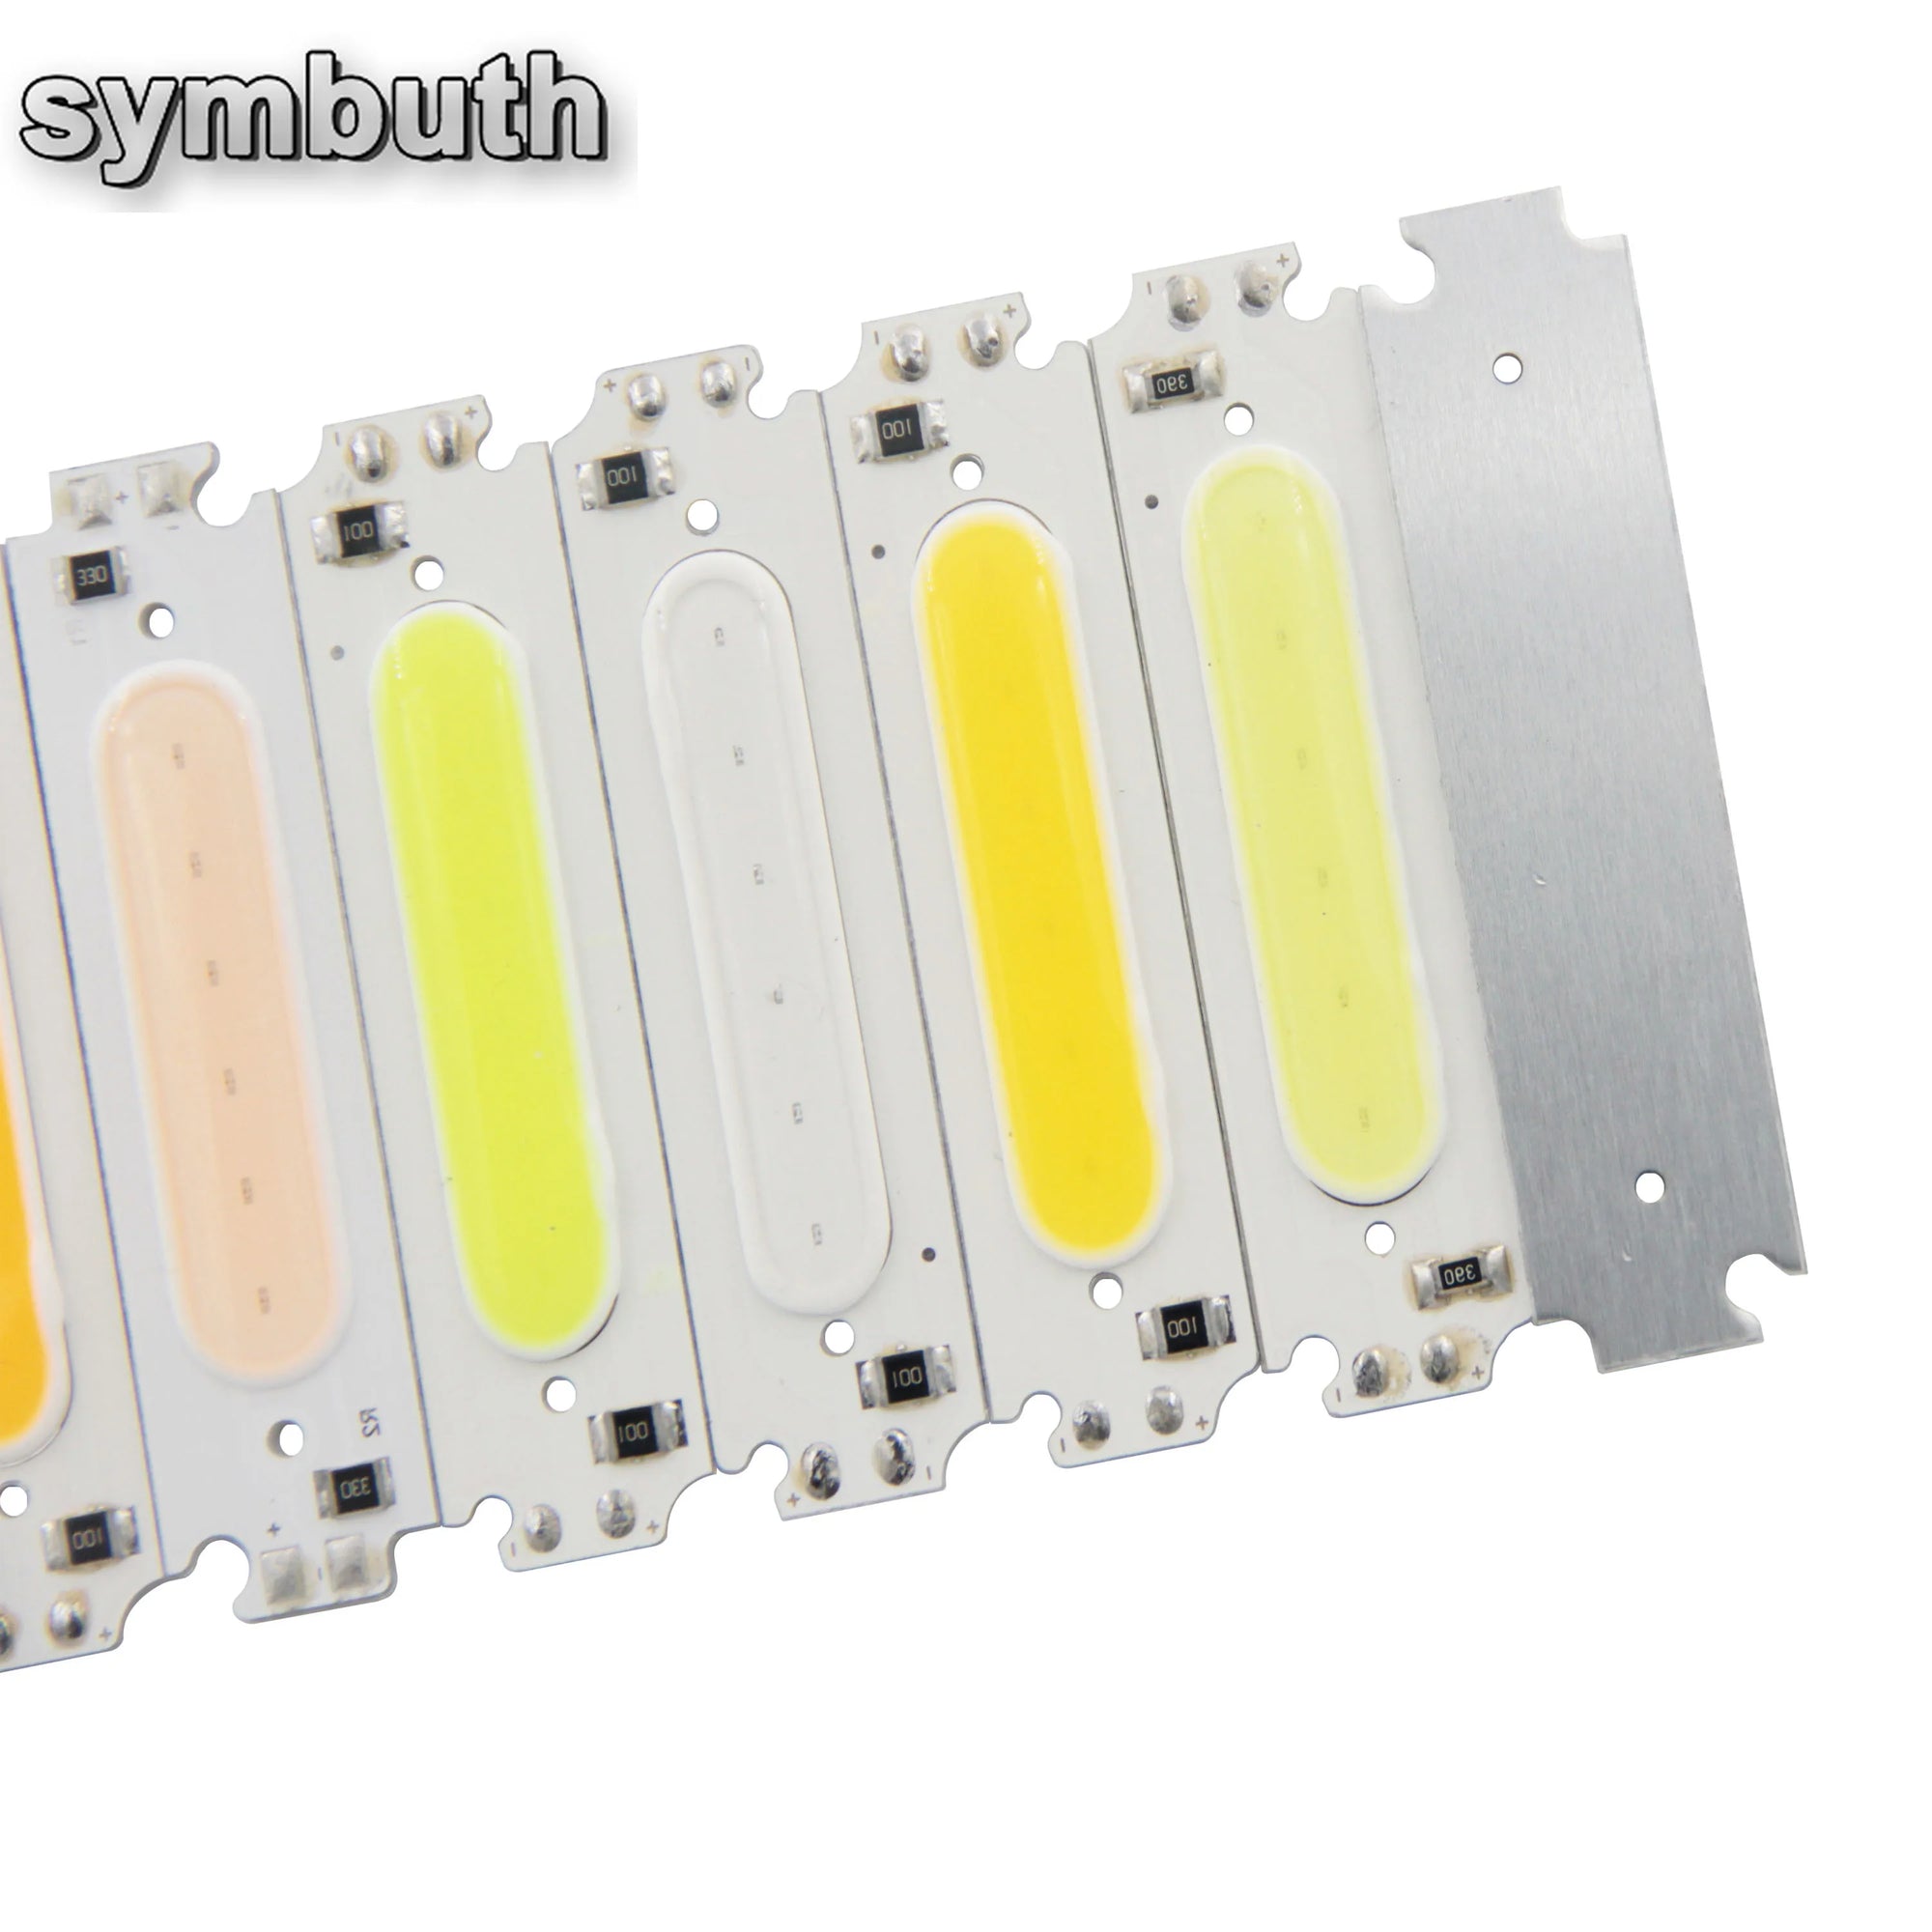 DC 12V 60*15mm COB LED Bar 2W Diode Lighting Strip Red Blue Pink Green Yellow White Color for DIY Lamp